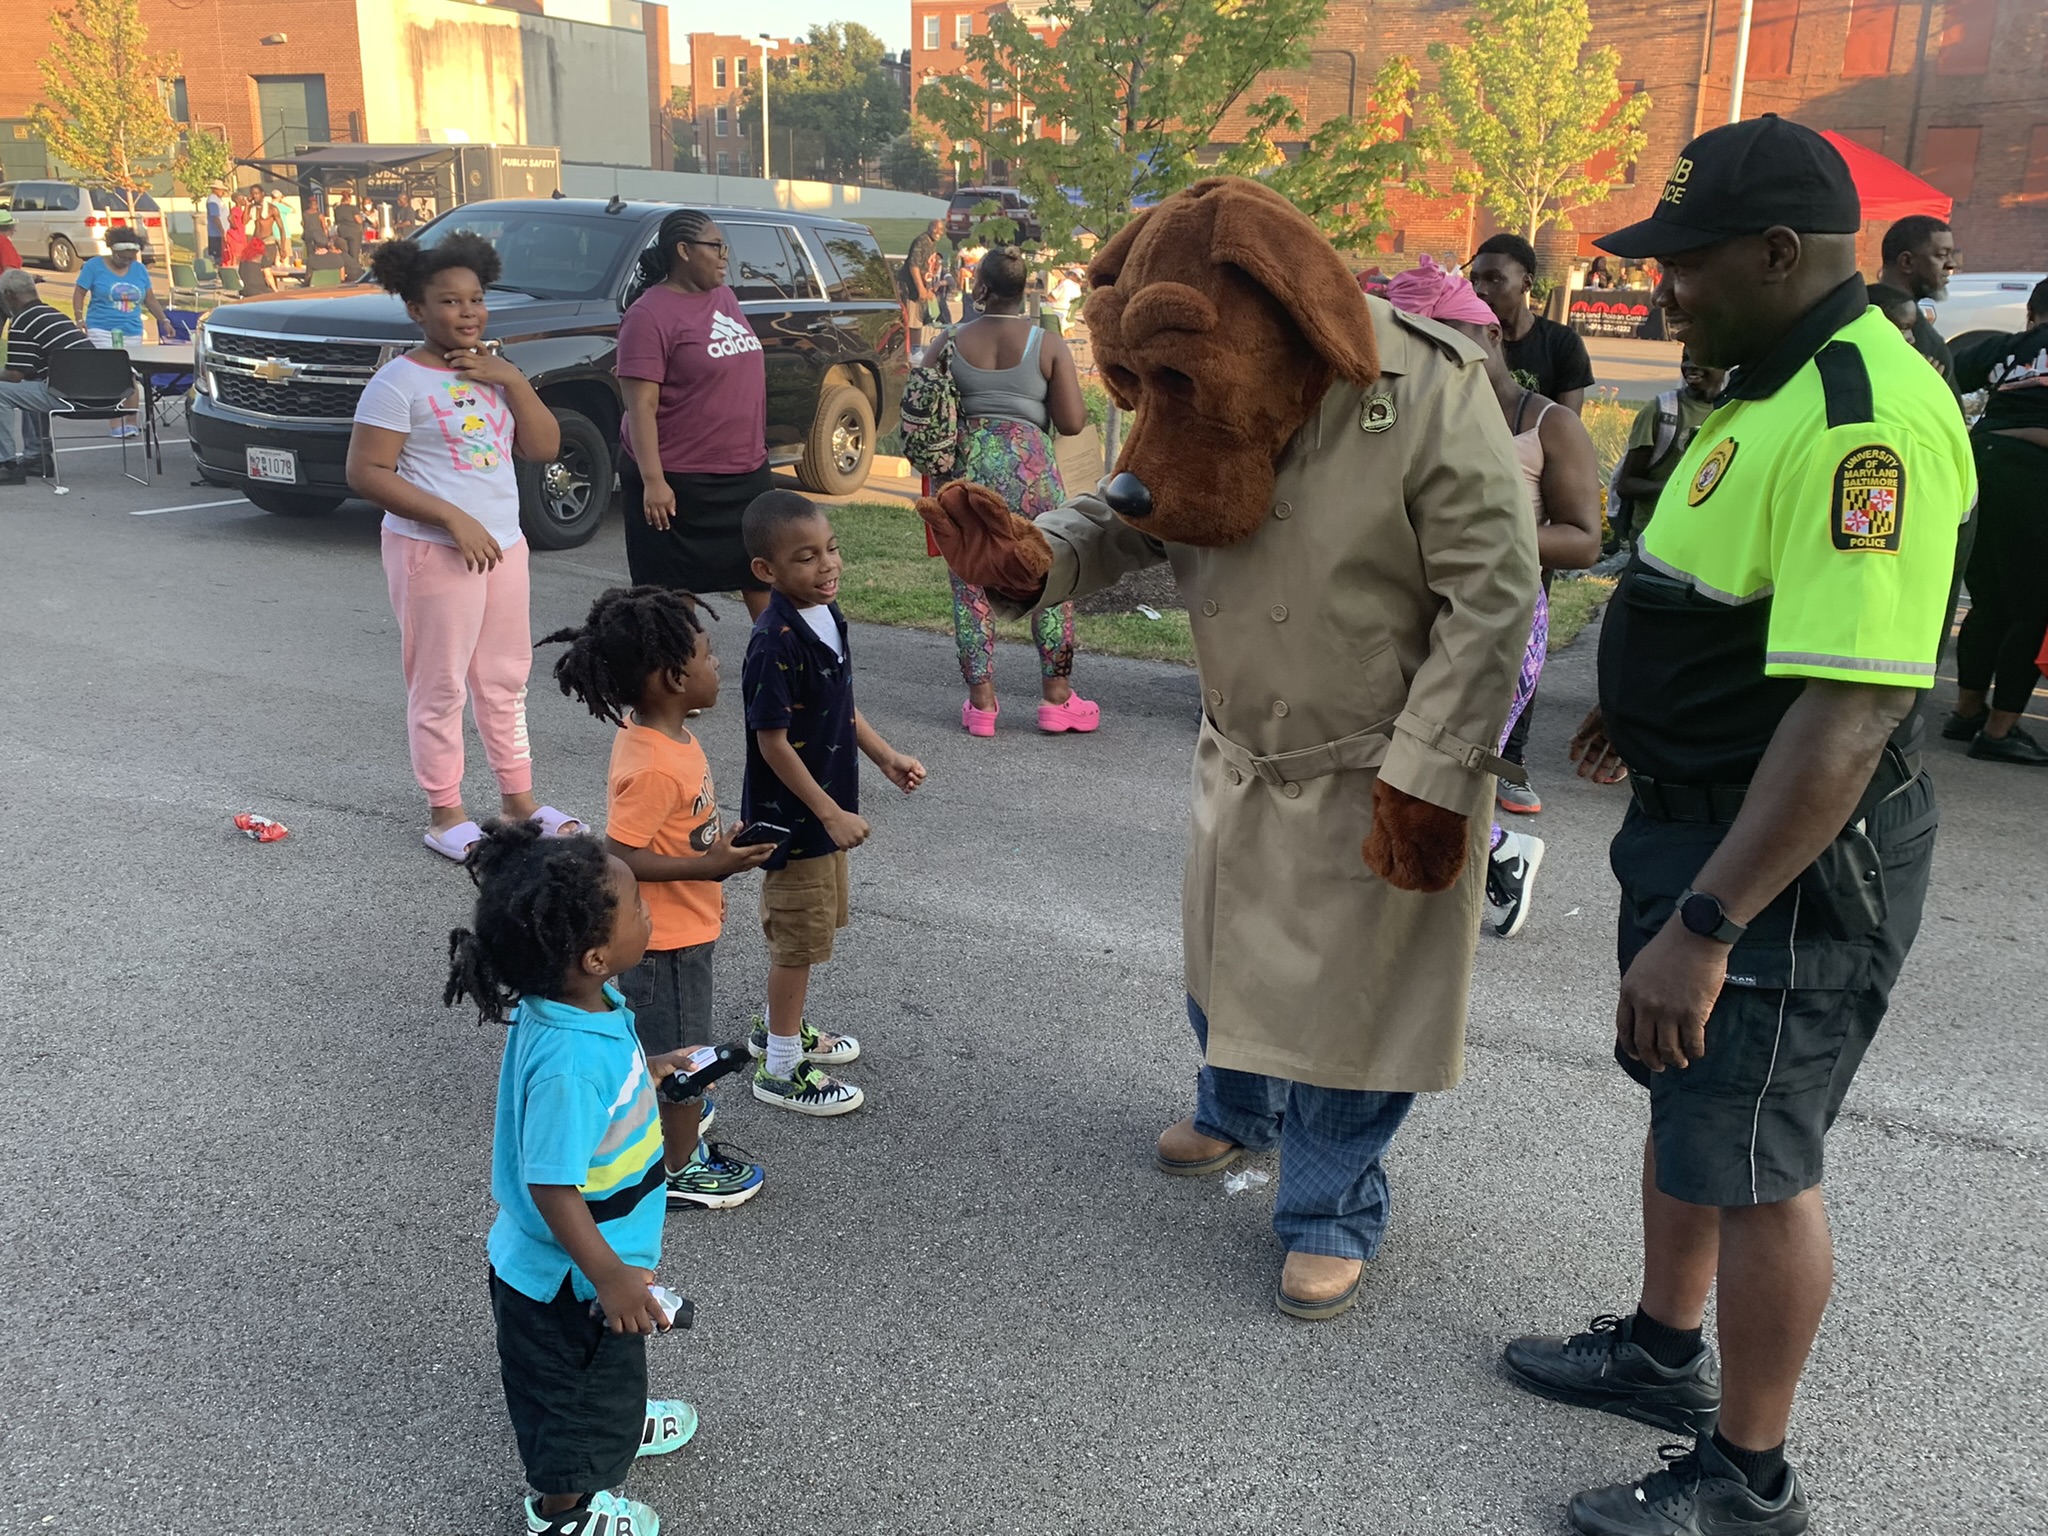 McGruff the Crime Dog high-fives community children at National Night Out